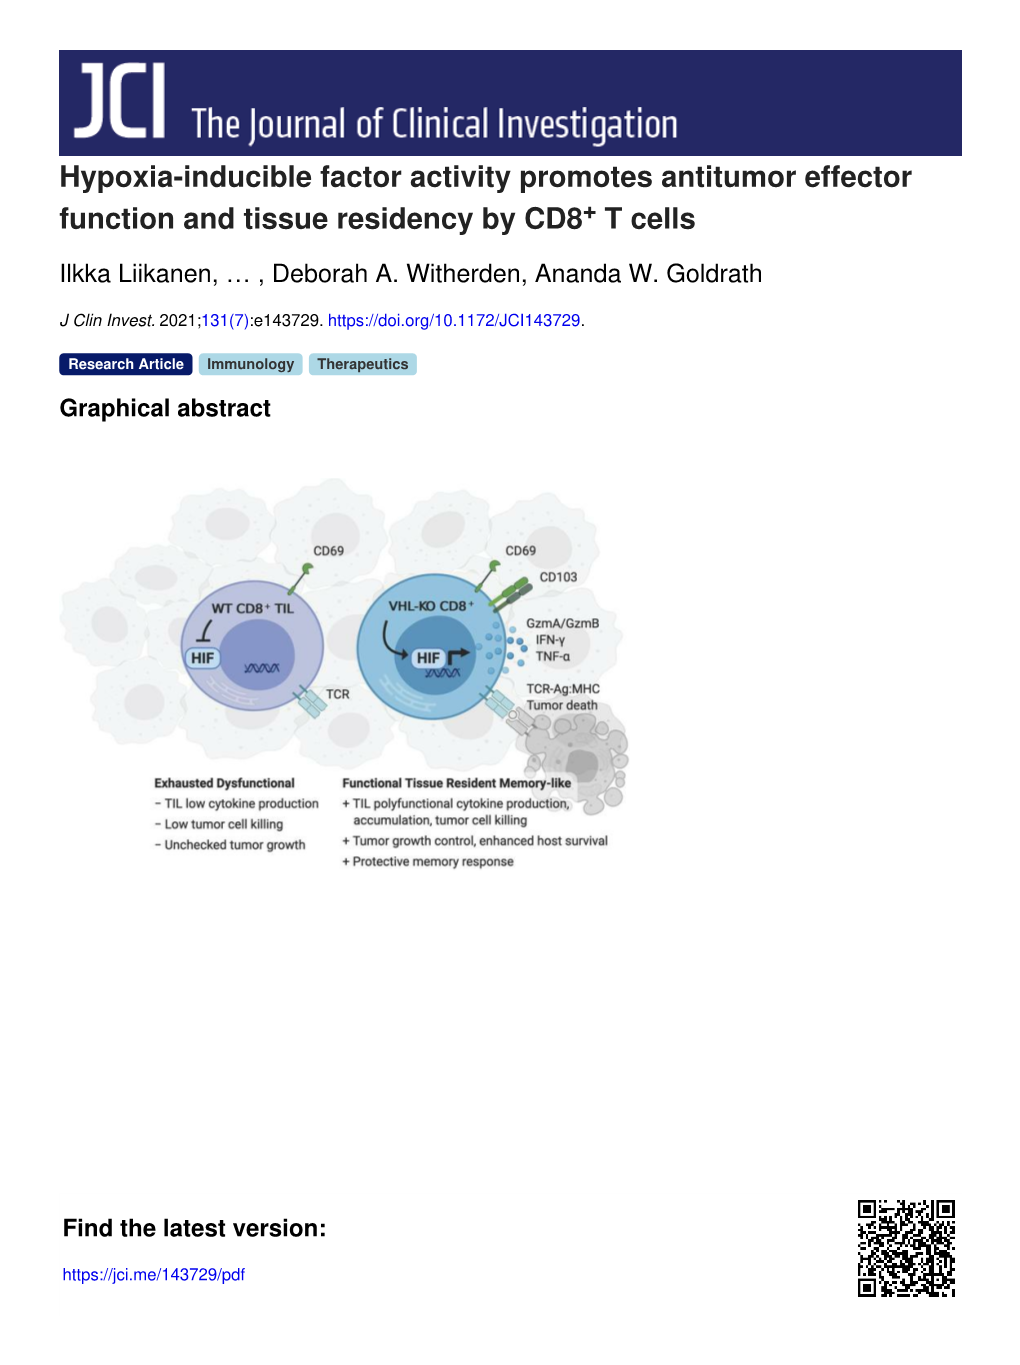 Hypoxia-Inducible Factor Activity Promotes Antitumor Effector Function and Tissue Residency by CD8+ T Cells